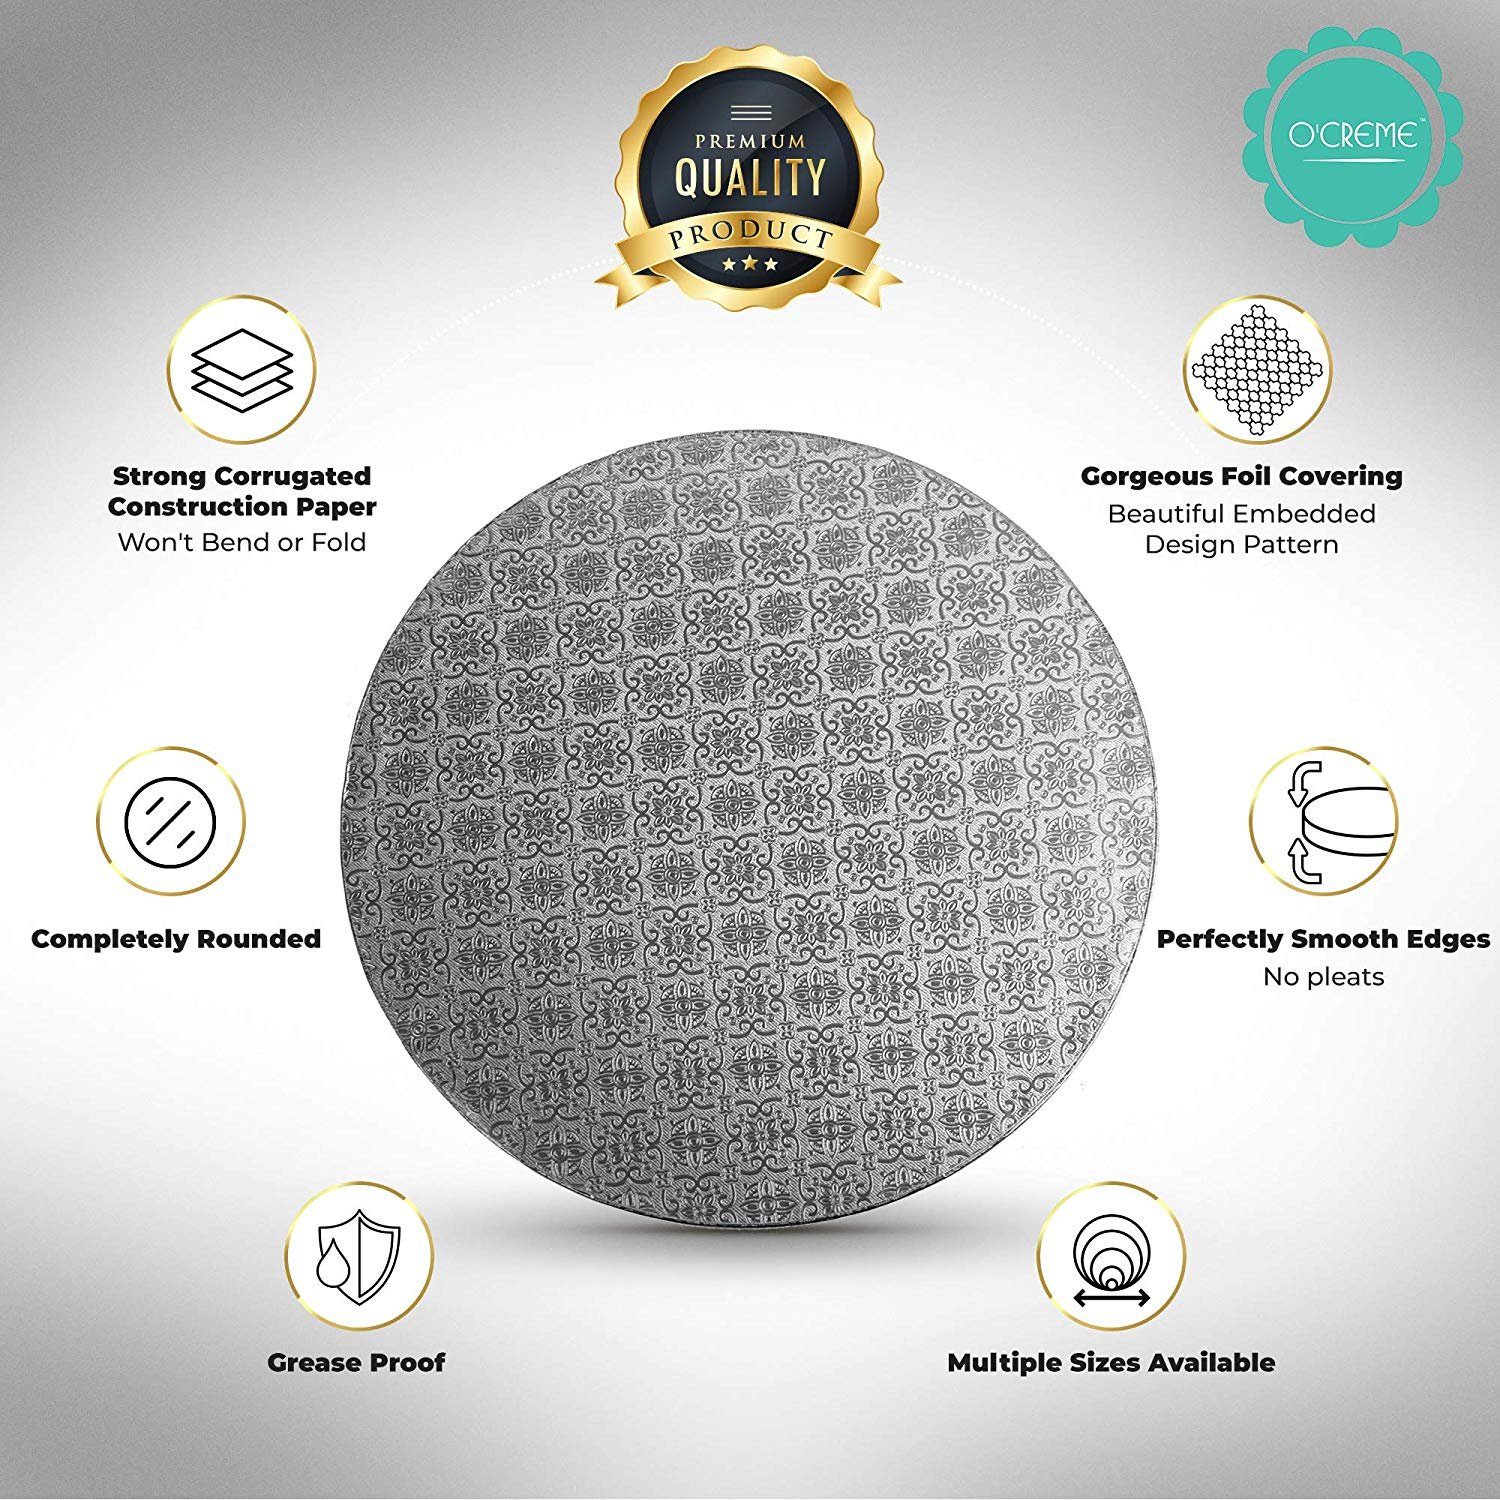 OCreme Cake Board, Silver Foil Round Cake Circles with Gorgeous Design, Sturdy & Durable 1/2 Thick Cake Drums, Round Cake Boards with 9 Diameter, Pack of 5 Disposable Cake Drums - image 4 of 6